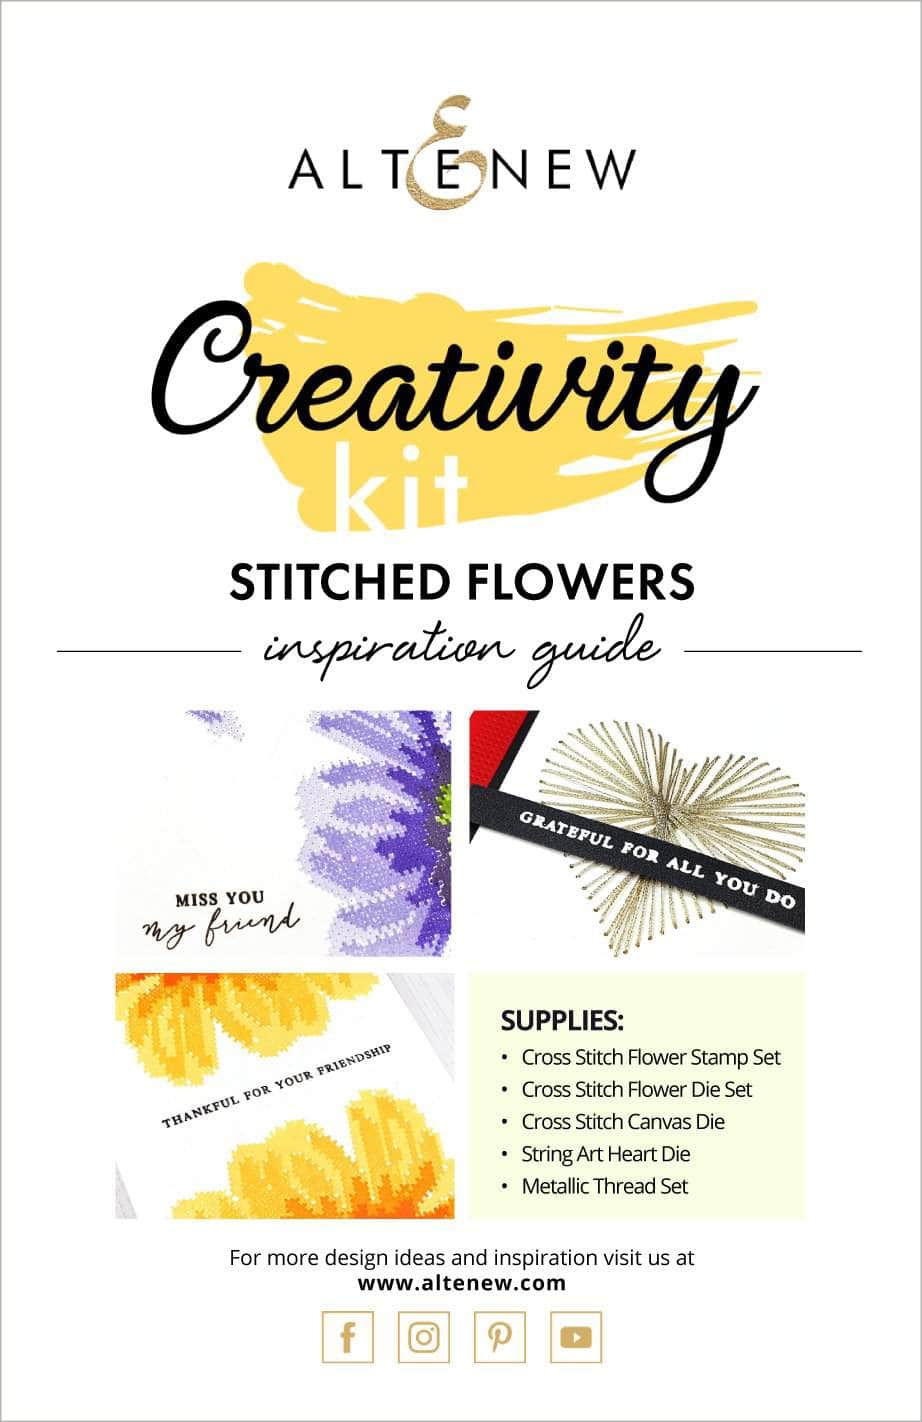 Printed Media Stitched Flowers Creativity Cardmaking Kit Inspiration Guide